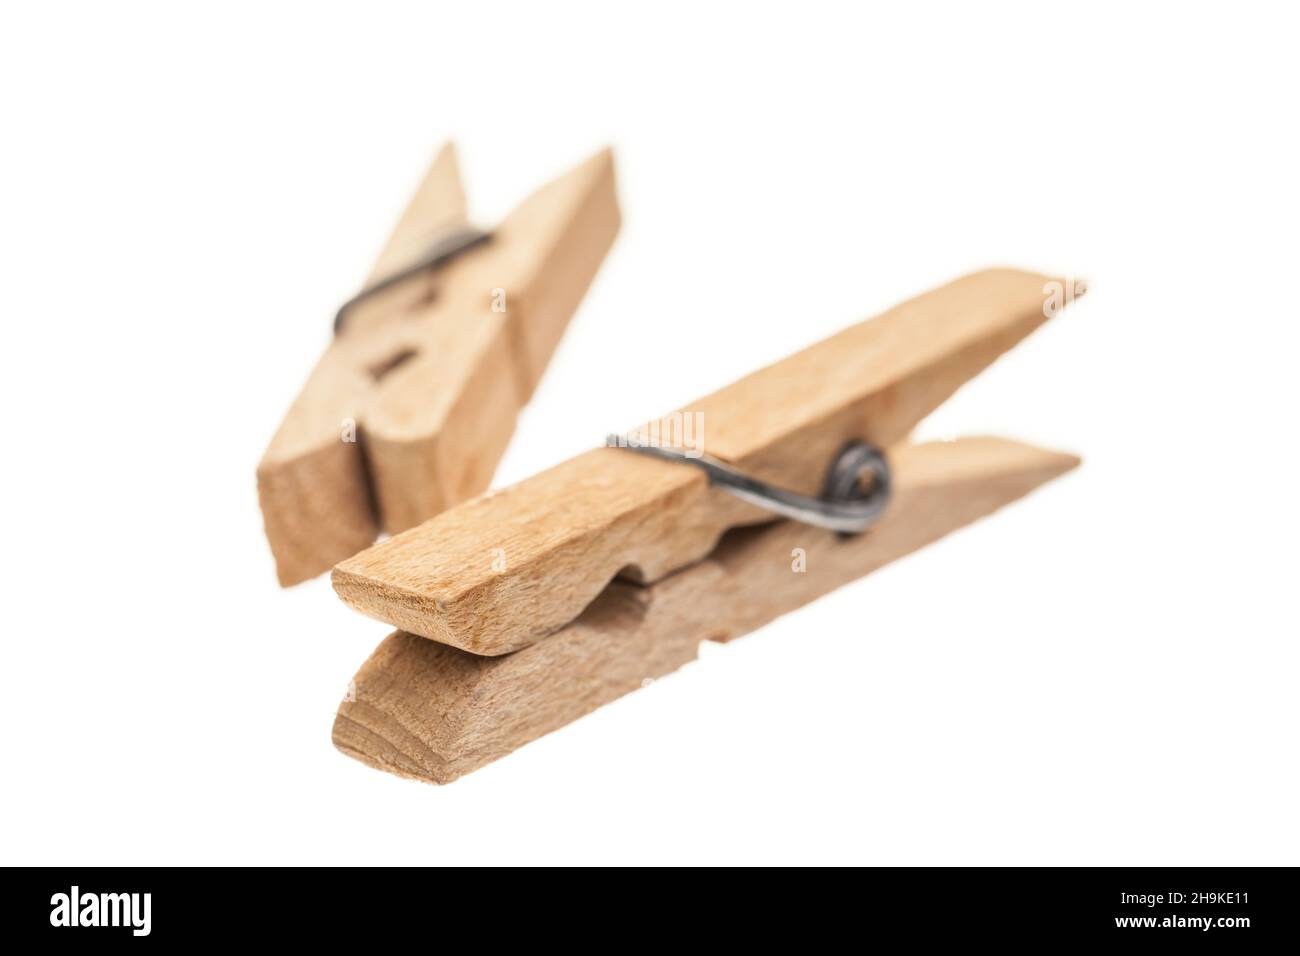 clothespin, wash, white, background, brown, wood, clip, clothes peg, old, traditional, used, lie, lying, simple, single, optional, isolated, two, plac Stock Photo